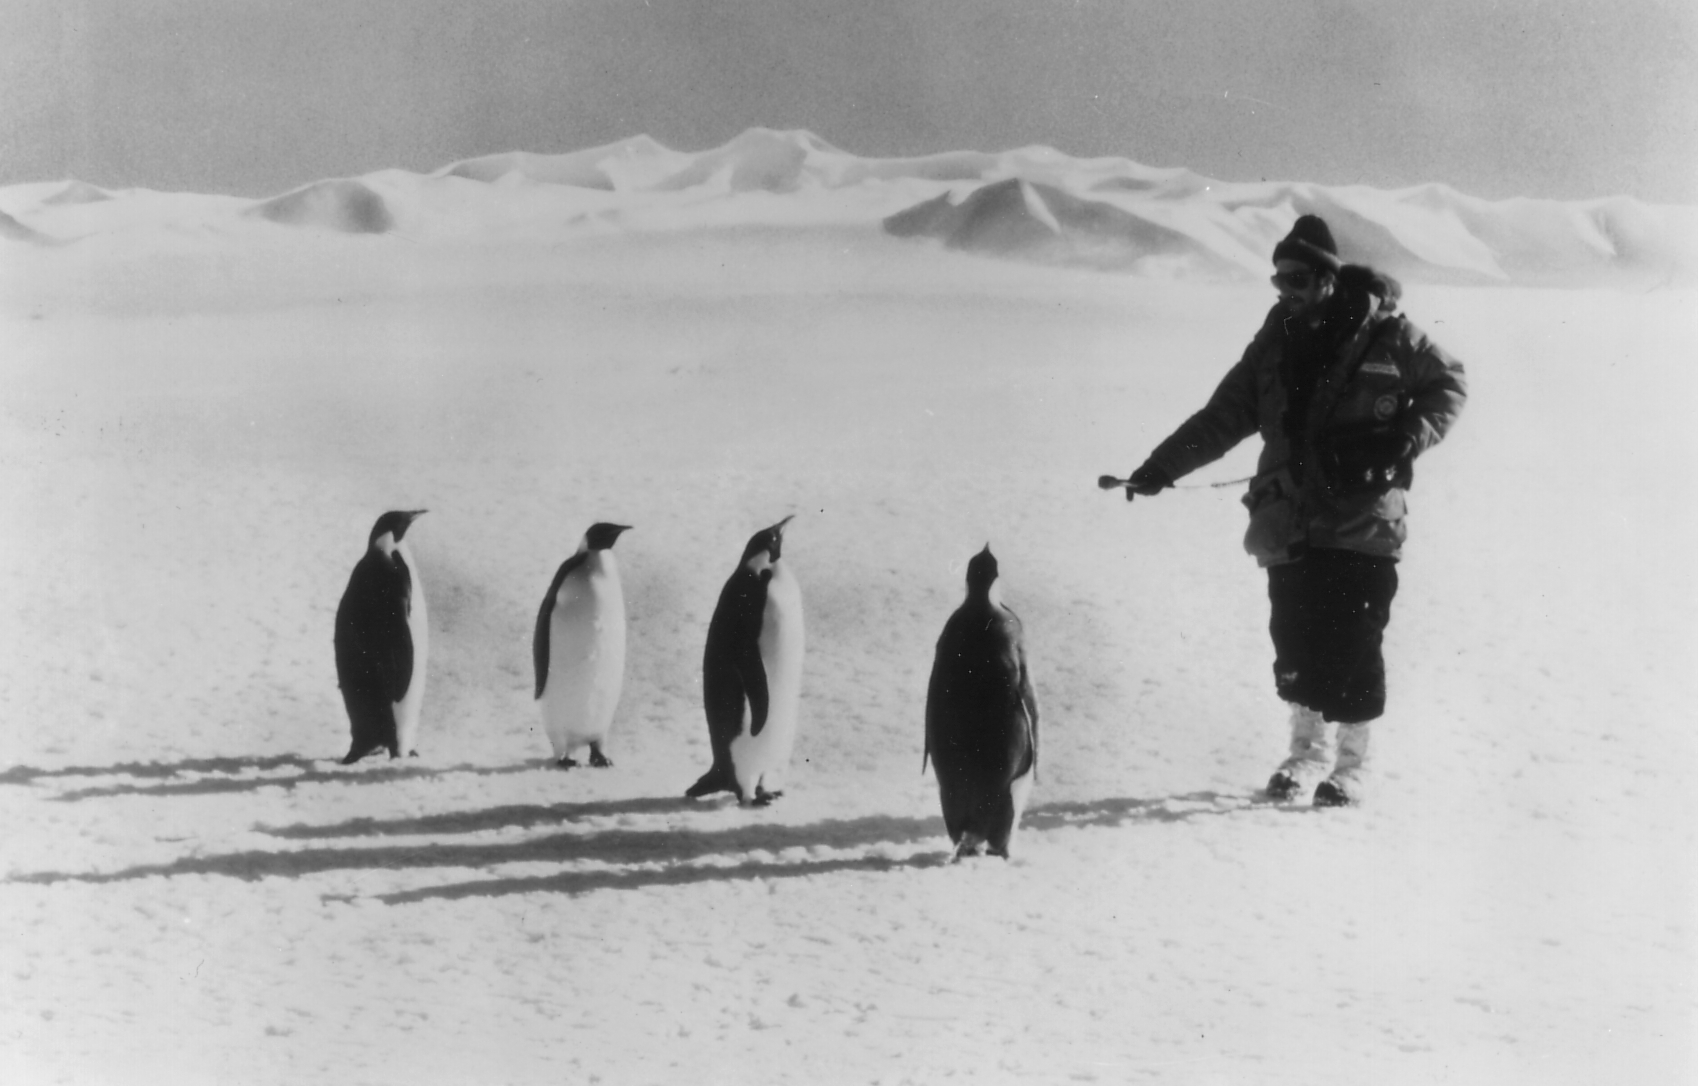 A man in Antarctica wearing a large coat pointing a mic at four emperor penguins in the foreground of a frozen landscape. 